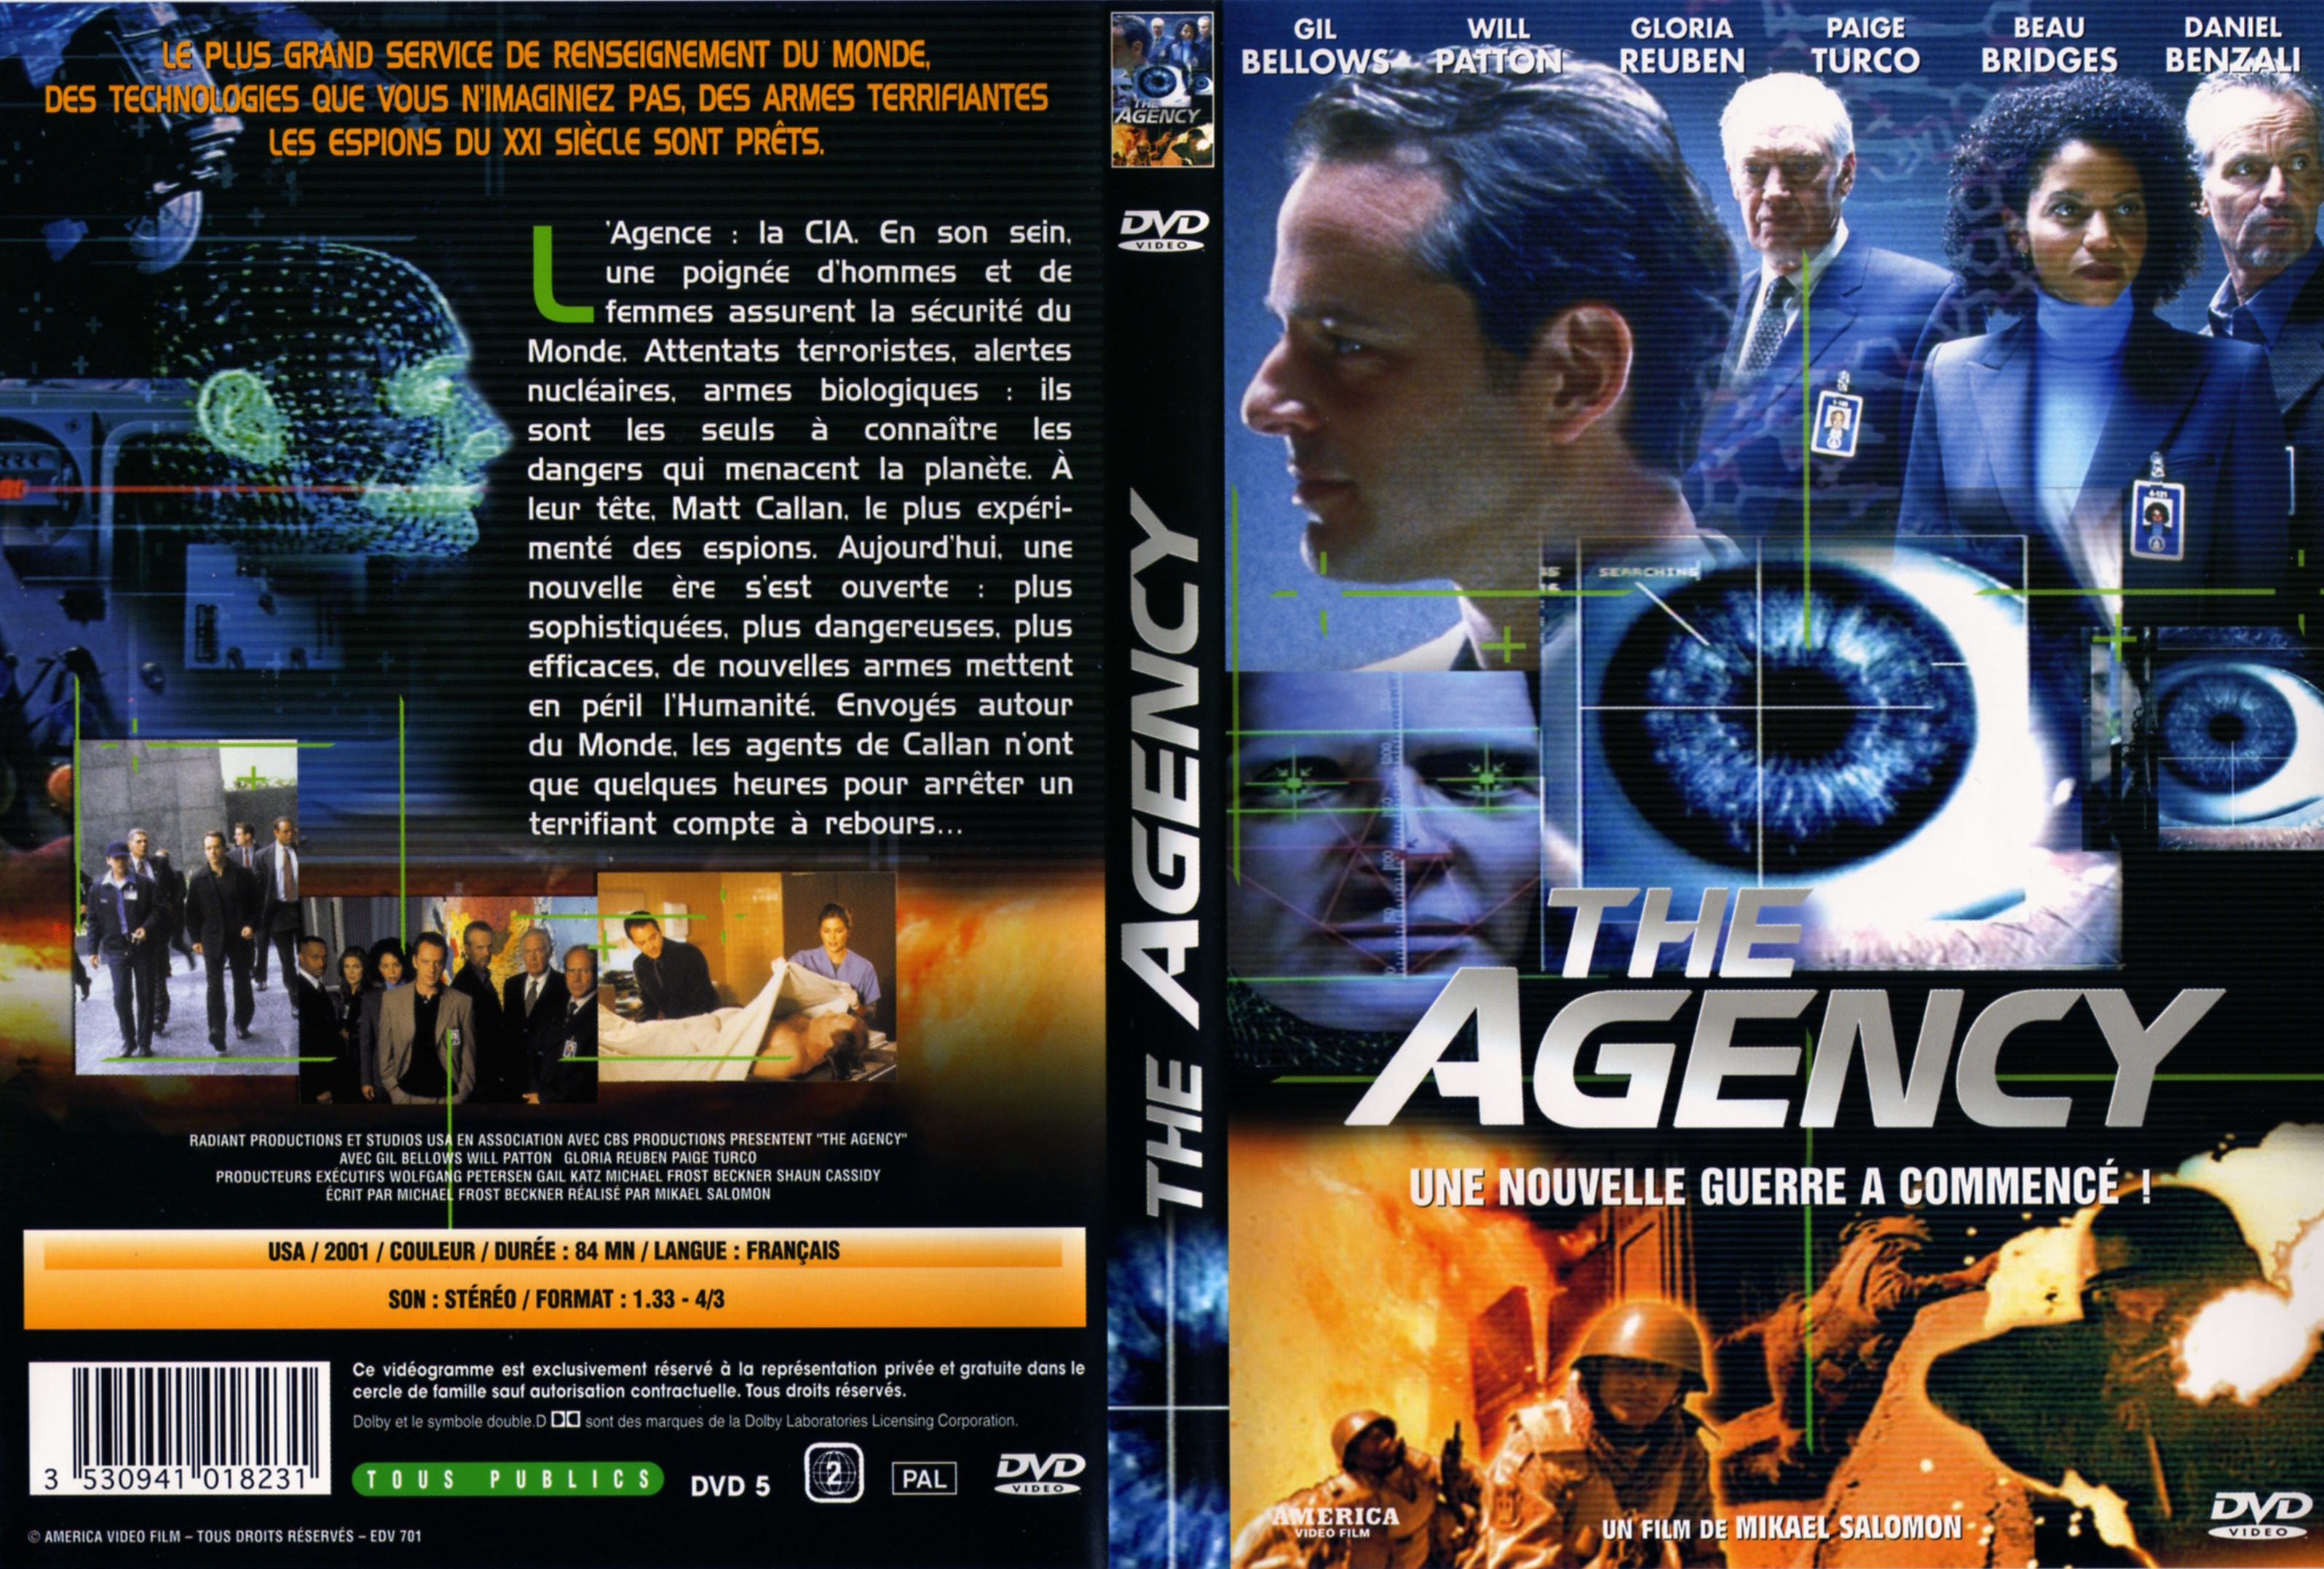 Jaquette DVD The agency